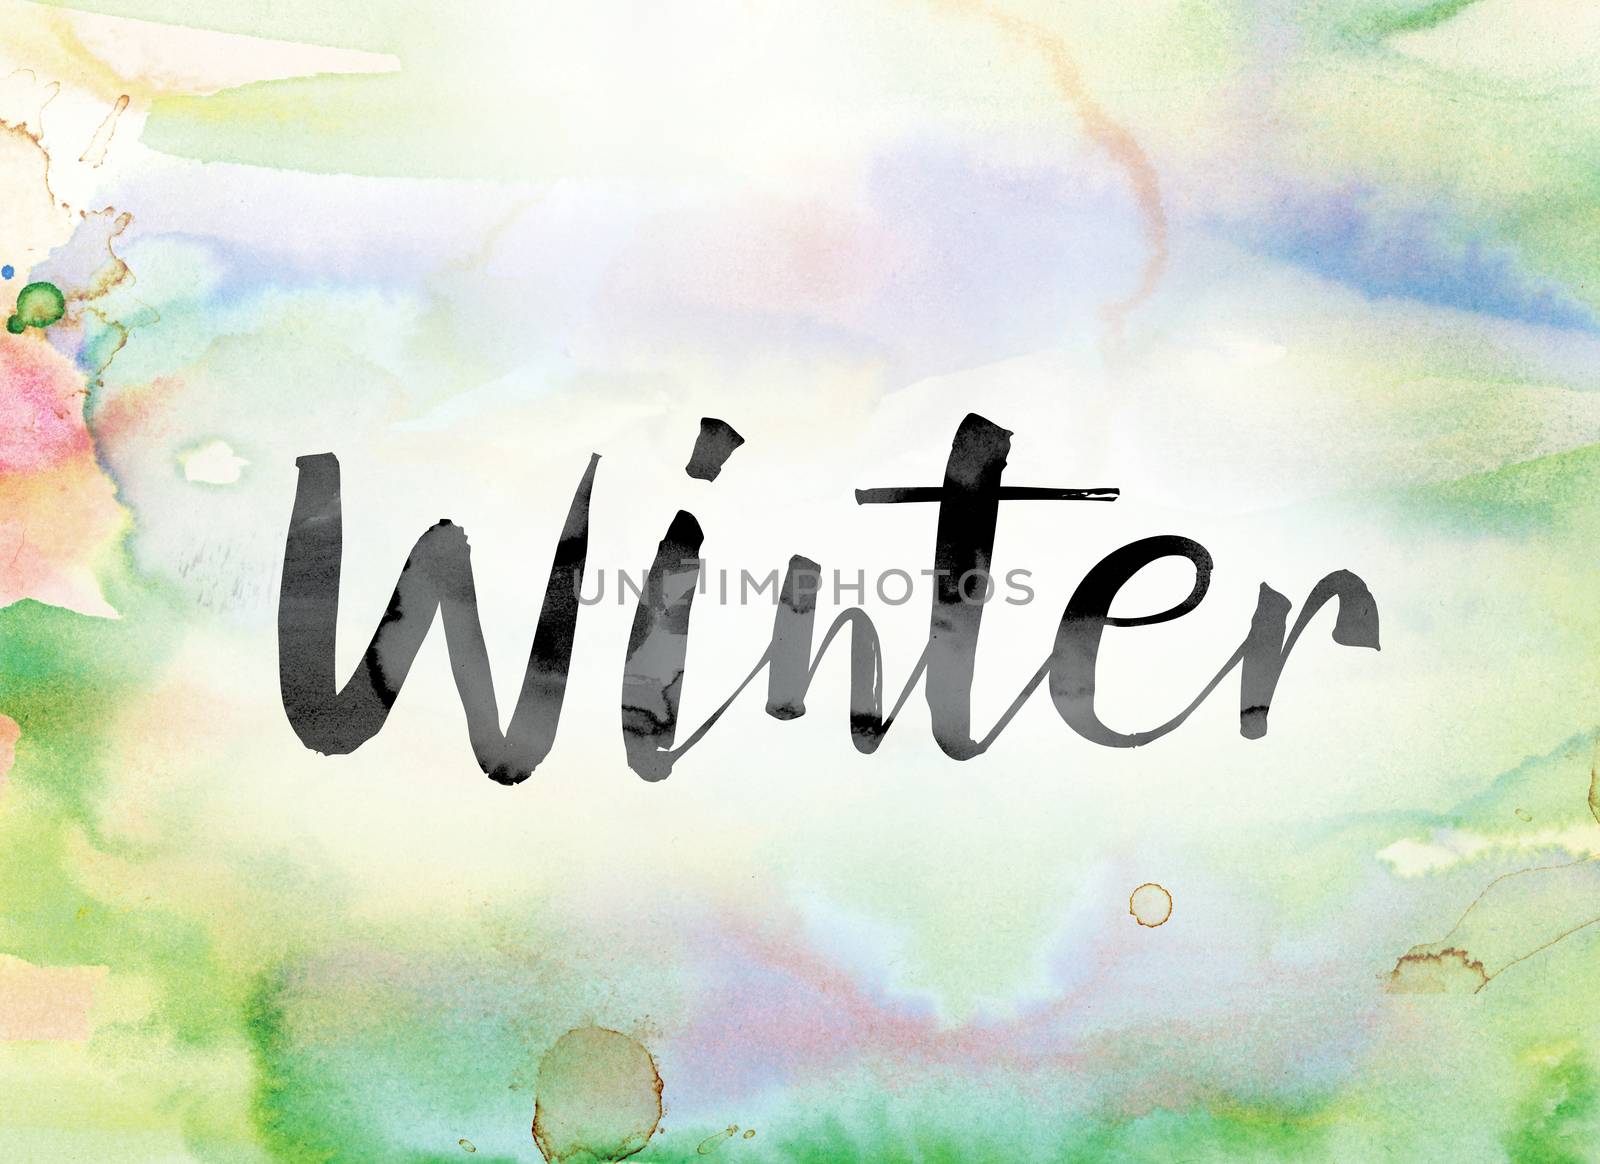 The word "Winter" painted in black ink over a colorful watercolor washed background concept and theme.